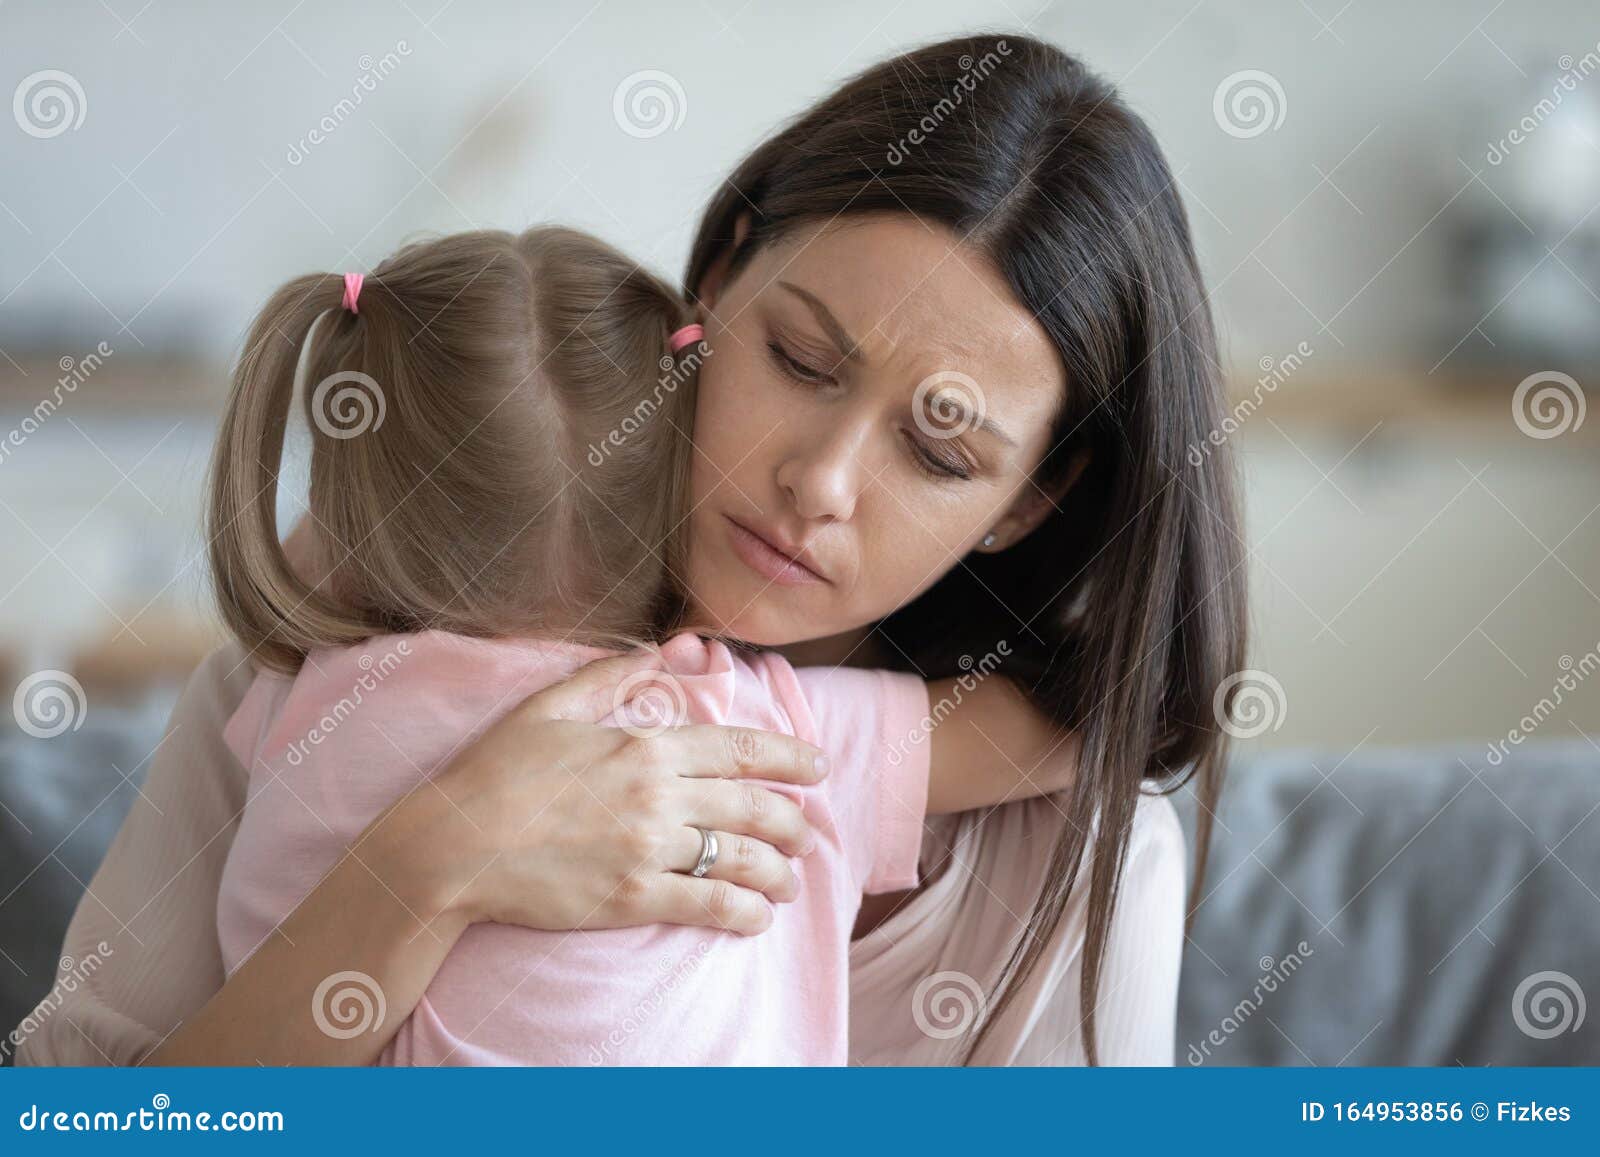 worried young foster mother comforting embracing adopted child daughter